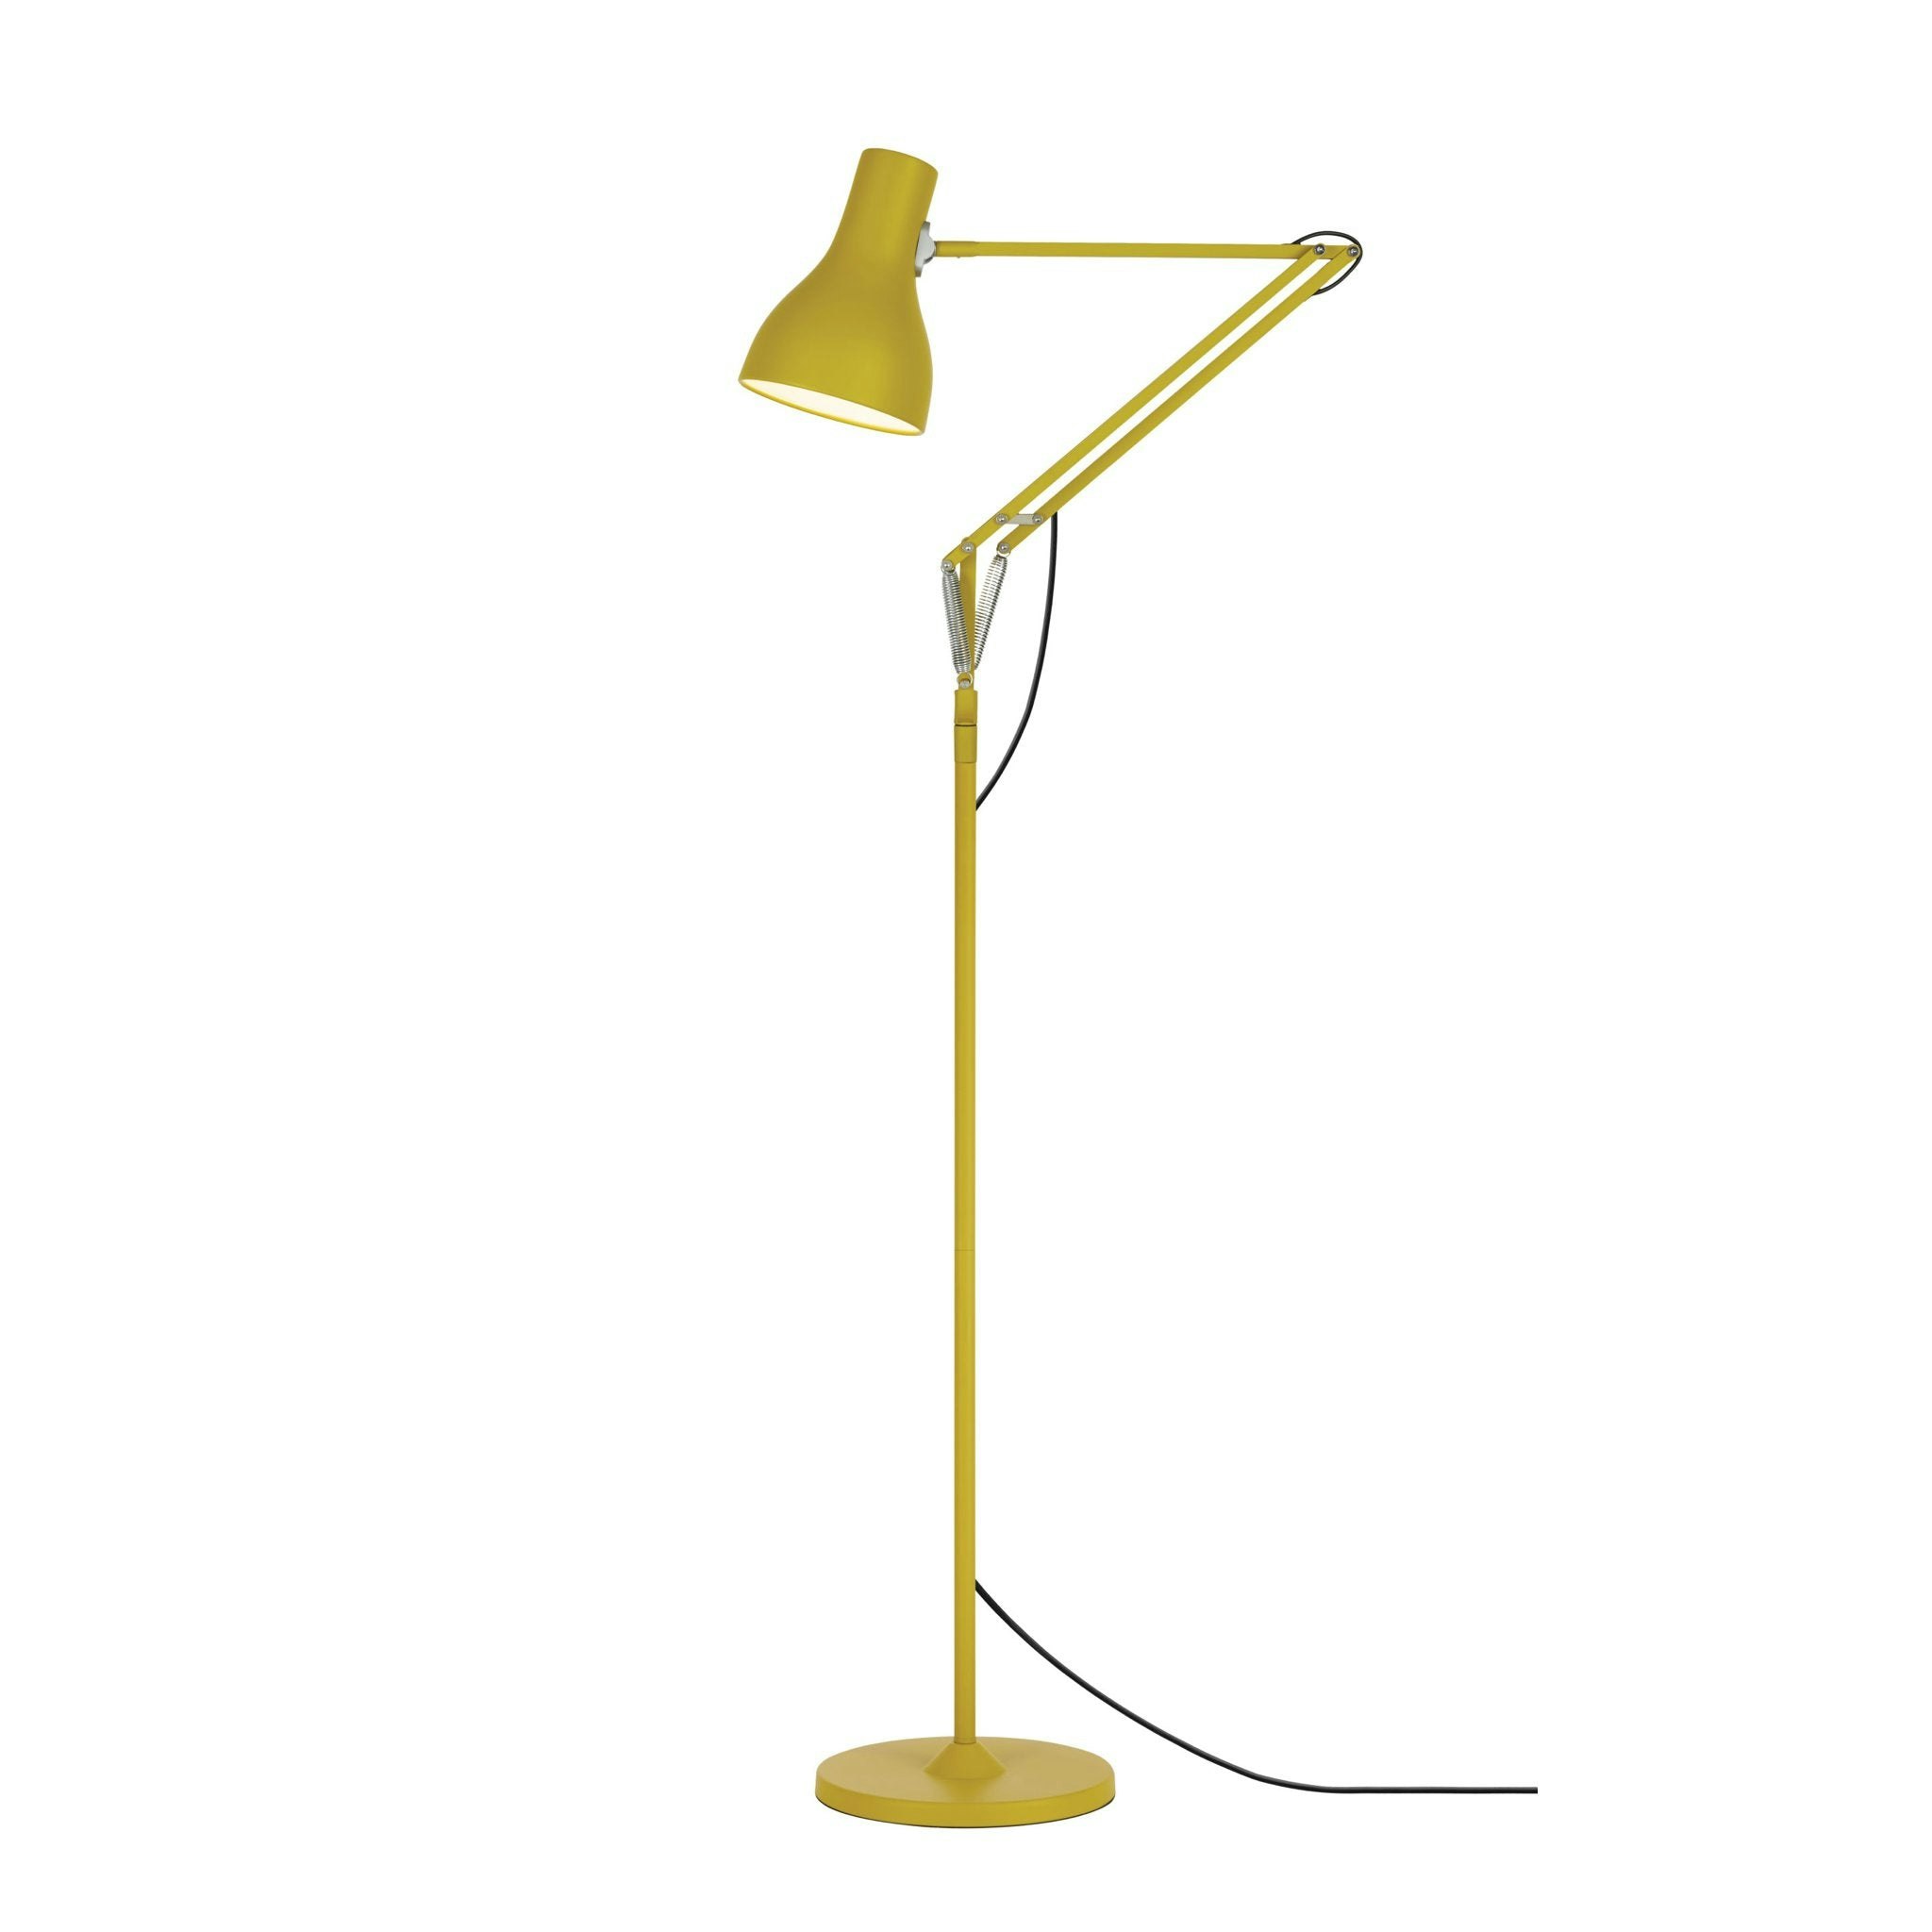 Type 75 Floor Lamp Yellow Ochre Edition by Margaret Howell for Anglepoise